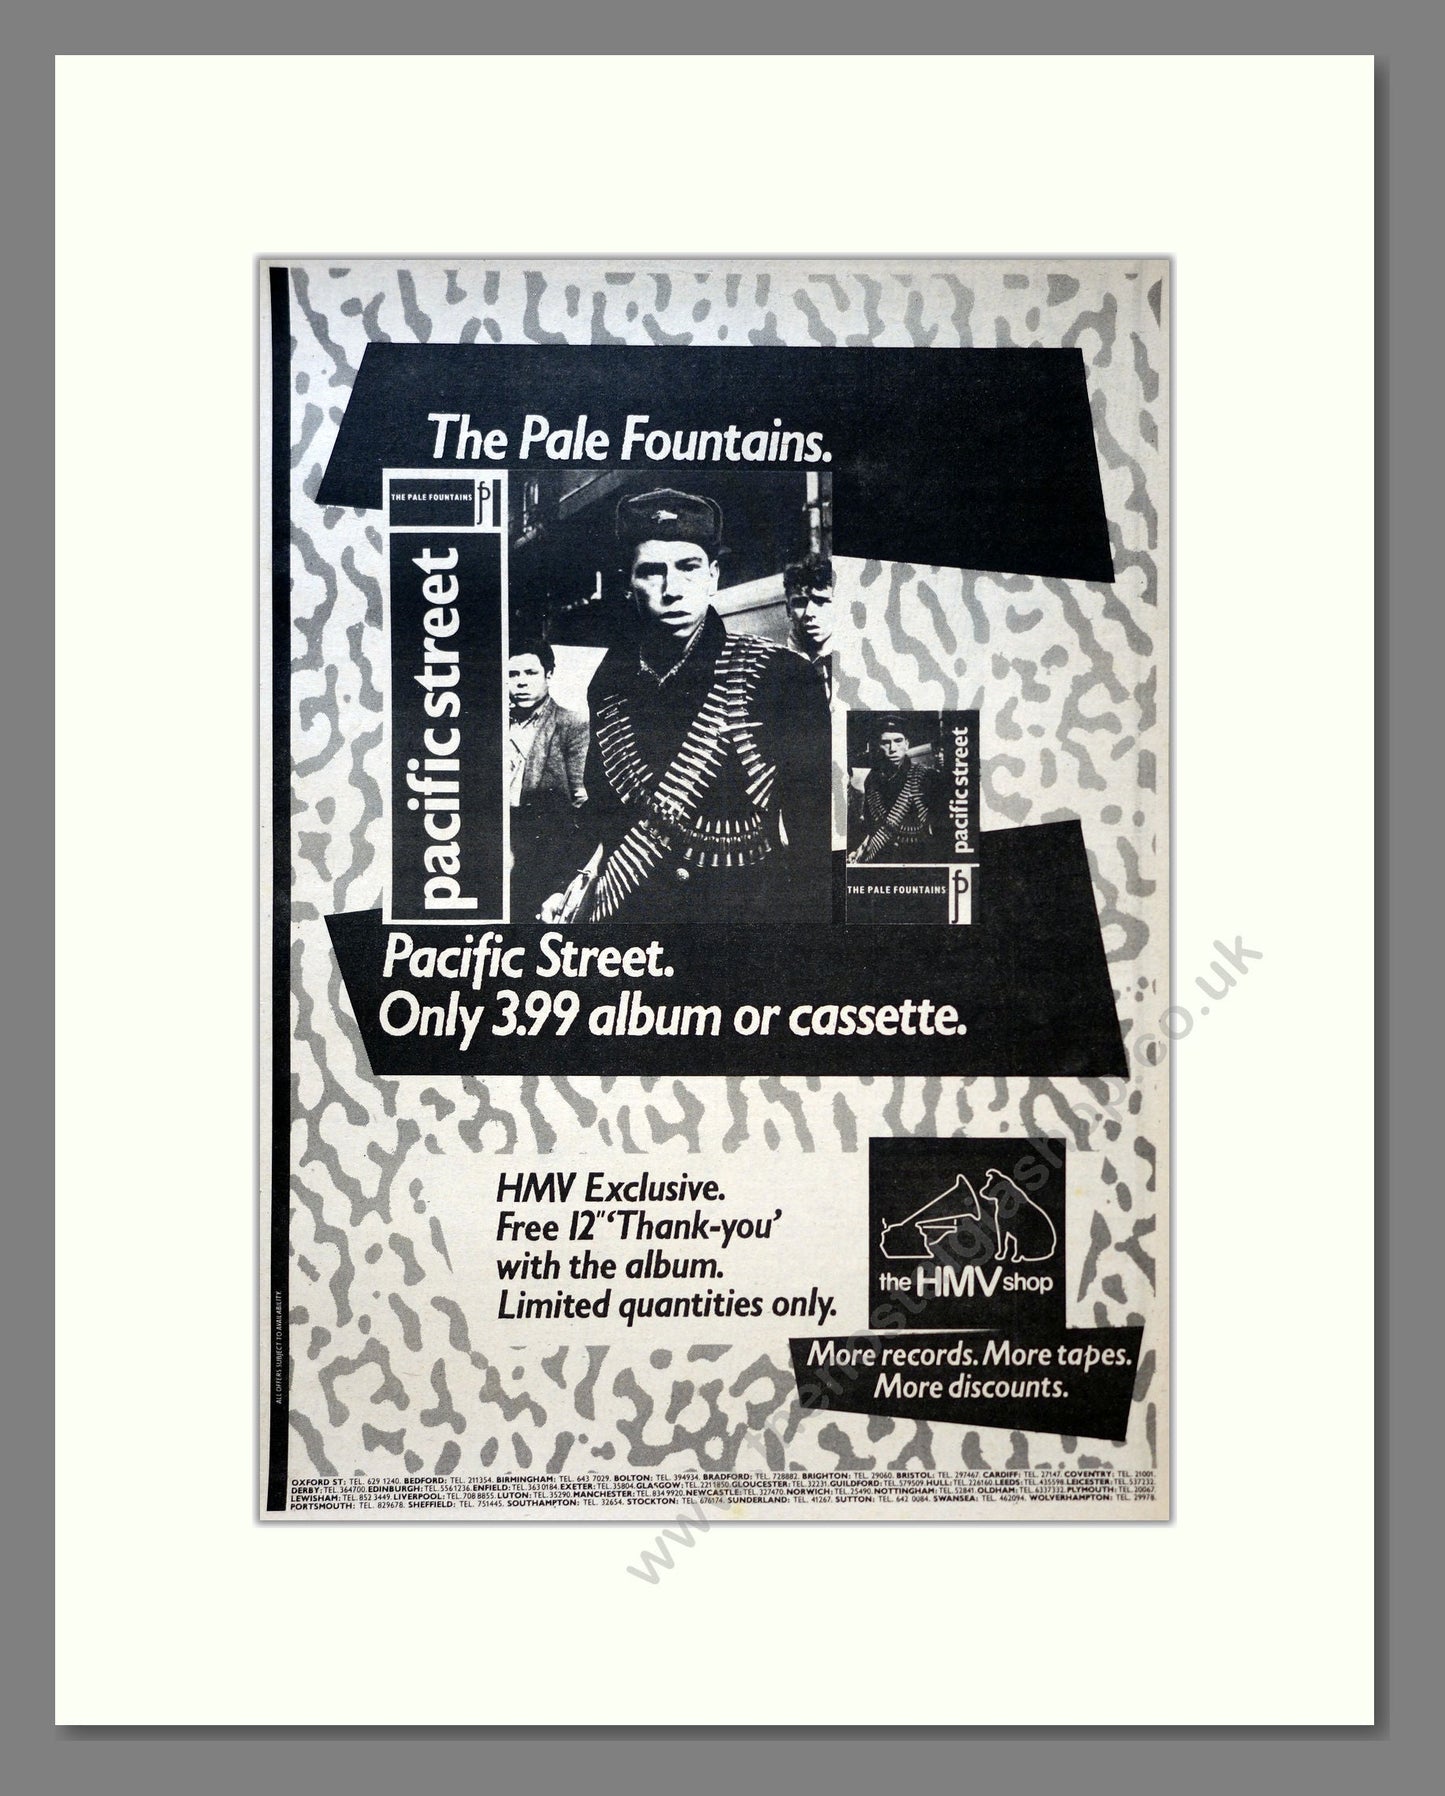 Pale Fountains (The) - Pacific Street. Vintage Advert 1984 (ref AD18326)